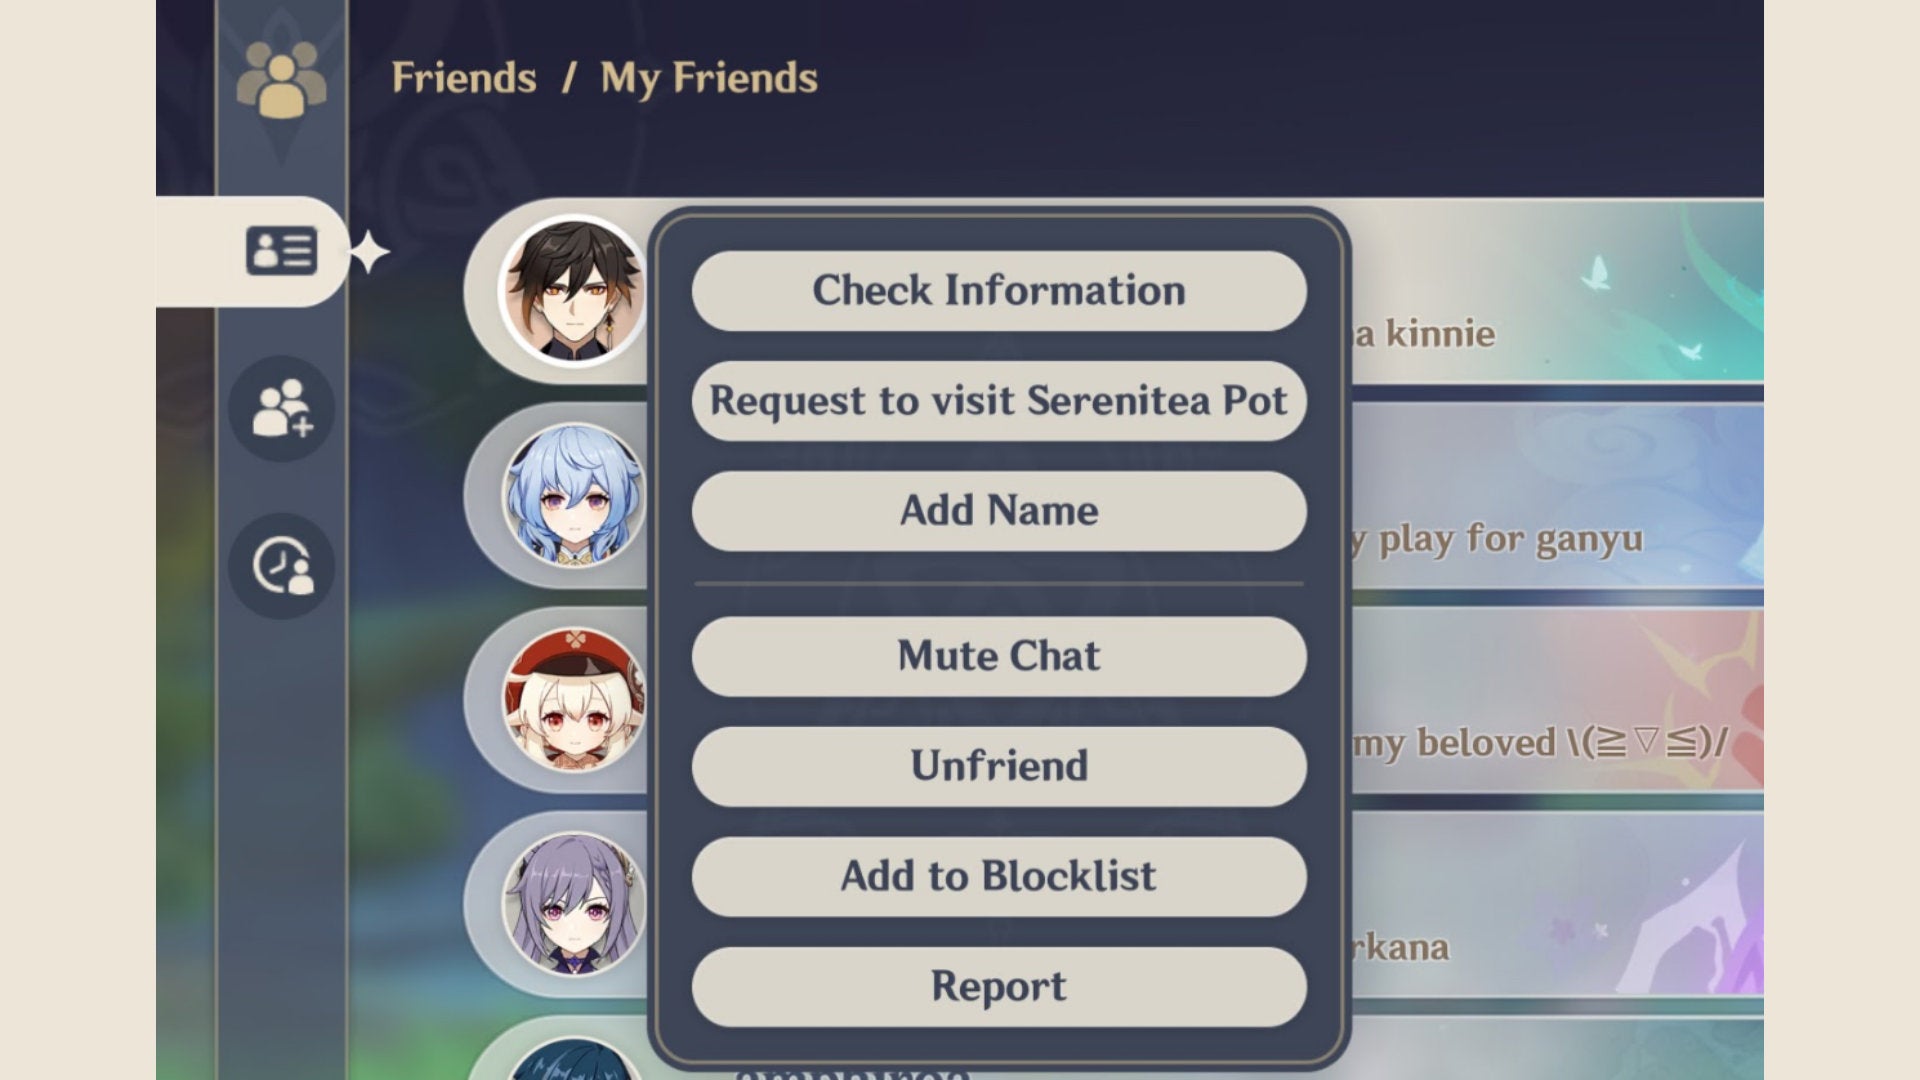 A Genshin Impact screenshot of the friends menu screen, showing the button which allows players to play Co-Op in the Serenitea Pot.